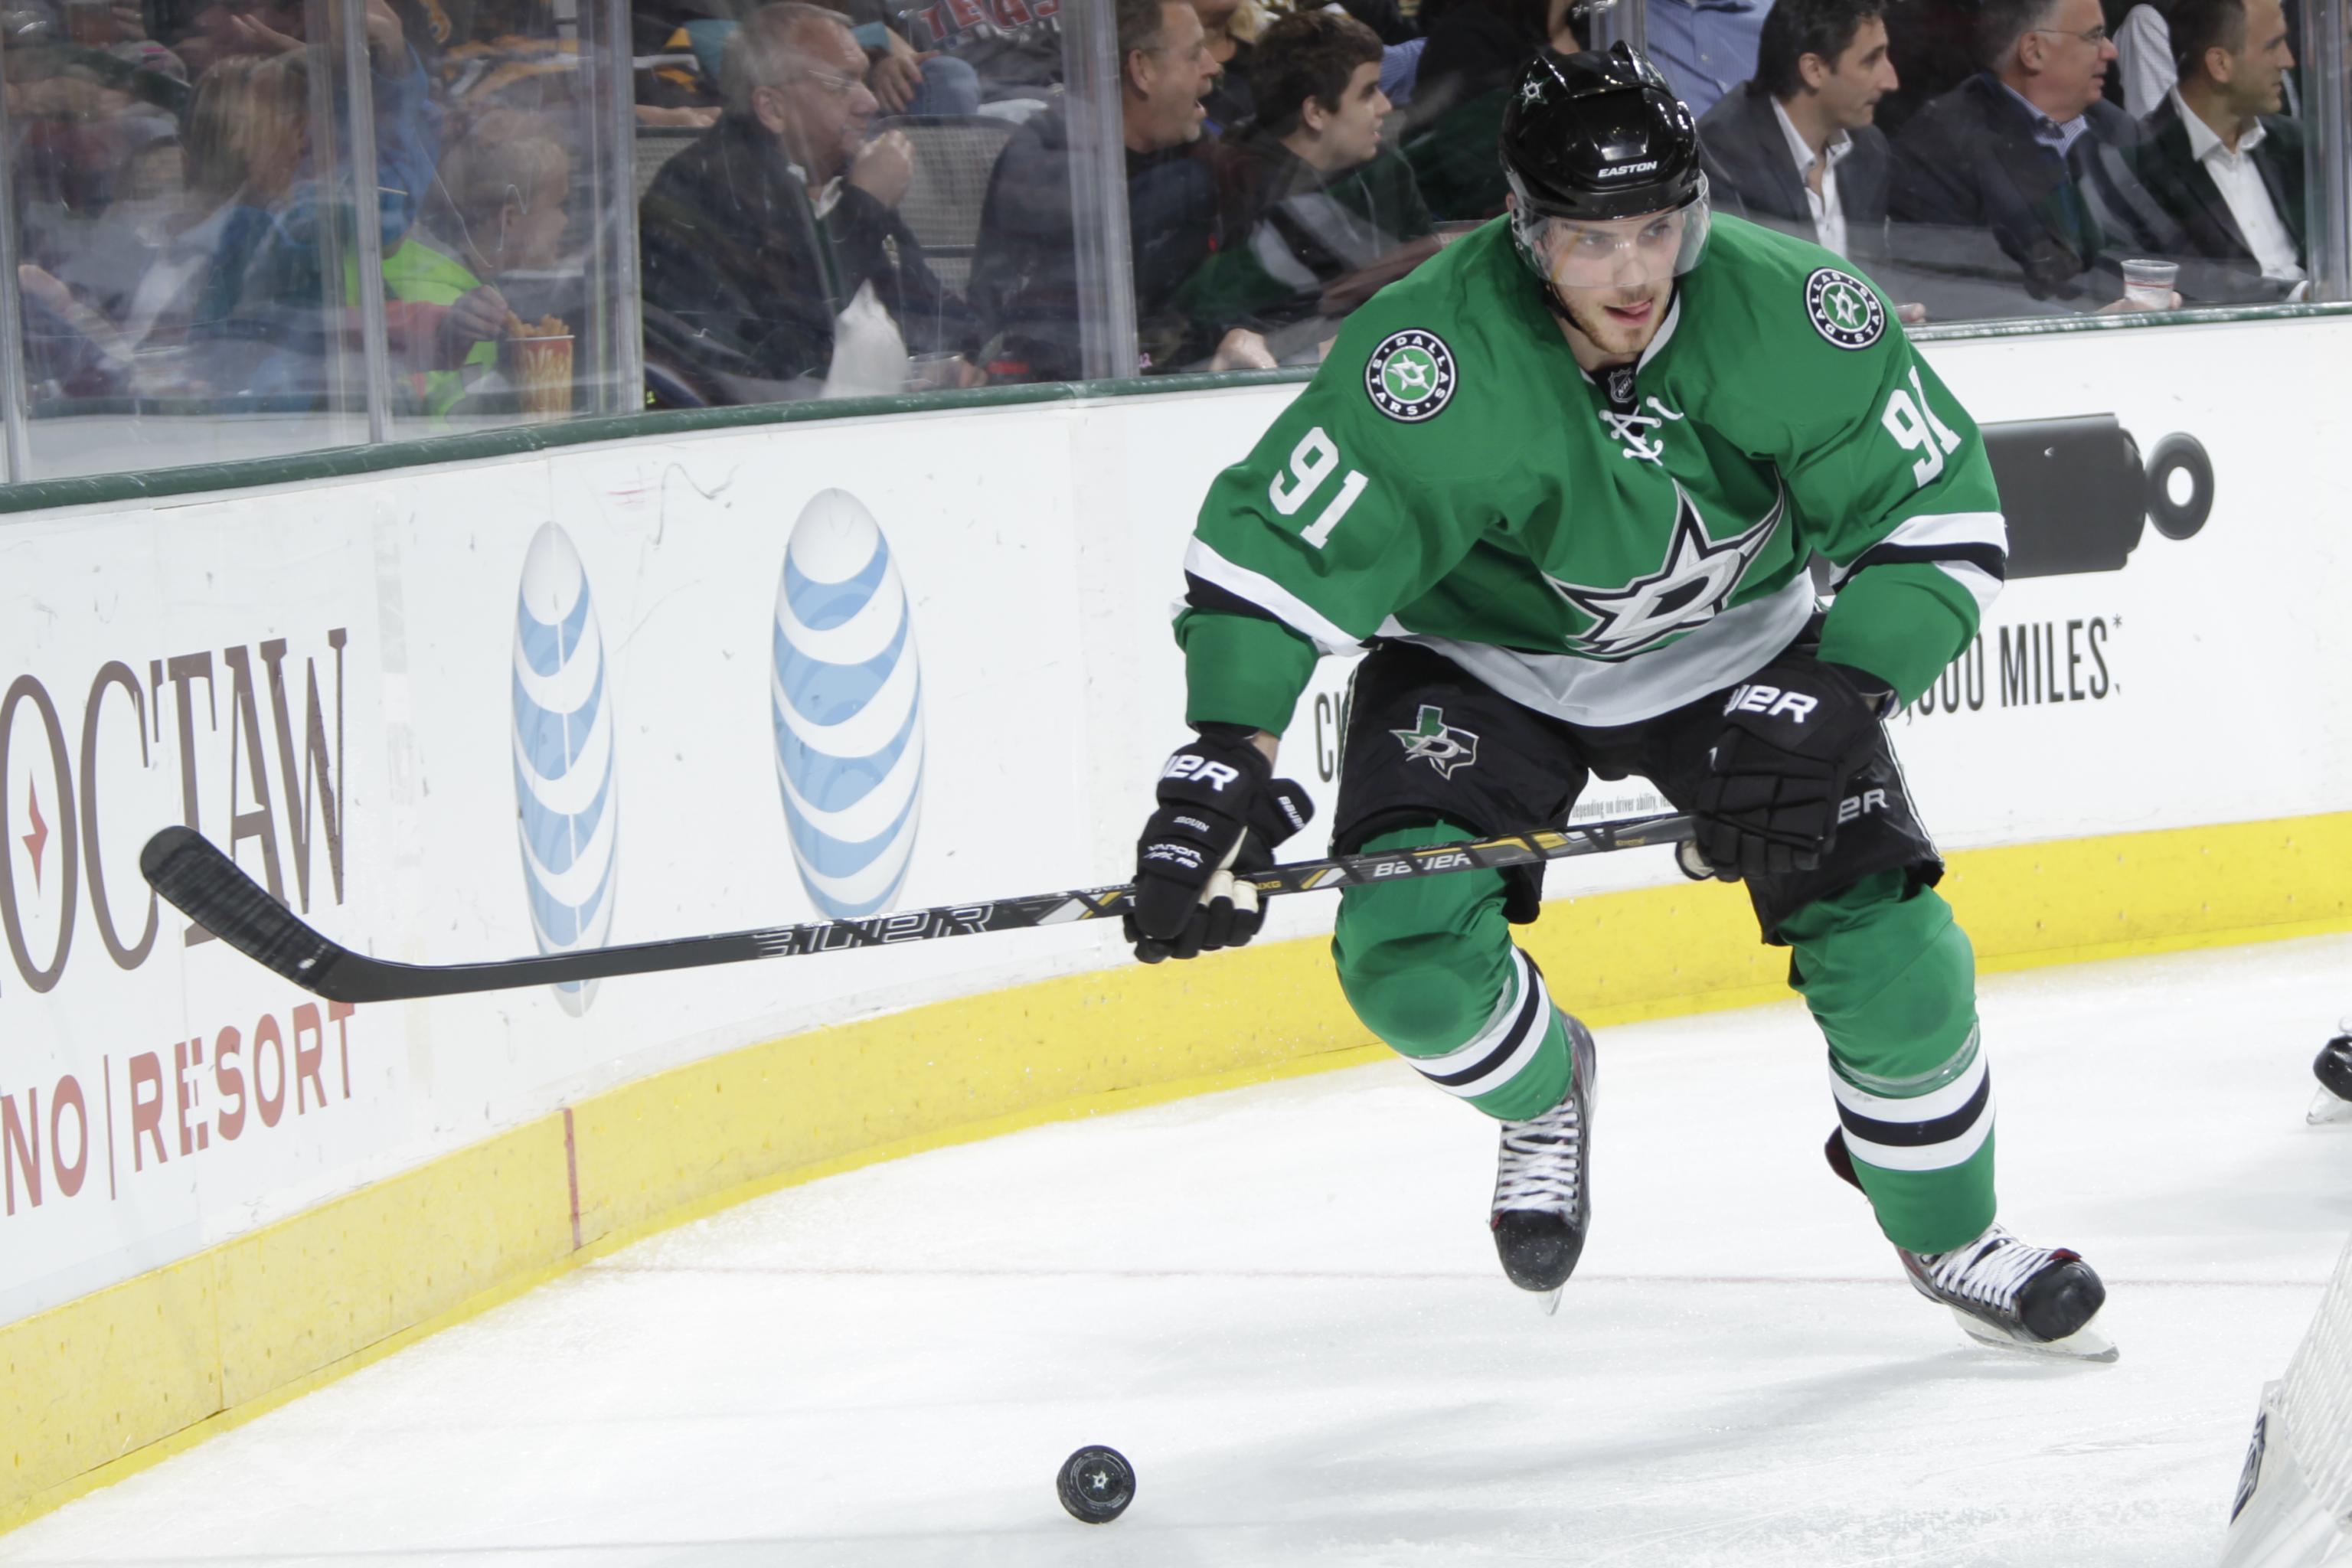 Dallas Stars - Tyler Seguin keeps it real in this Kia